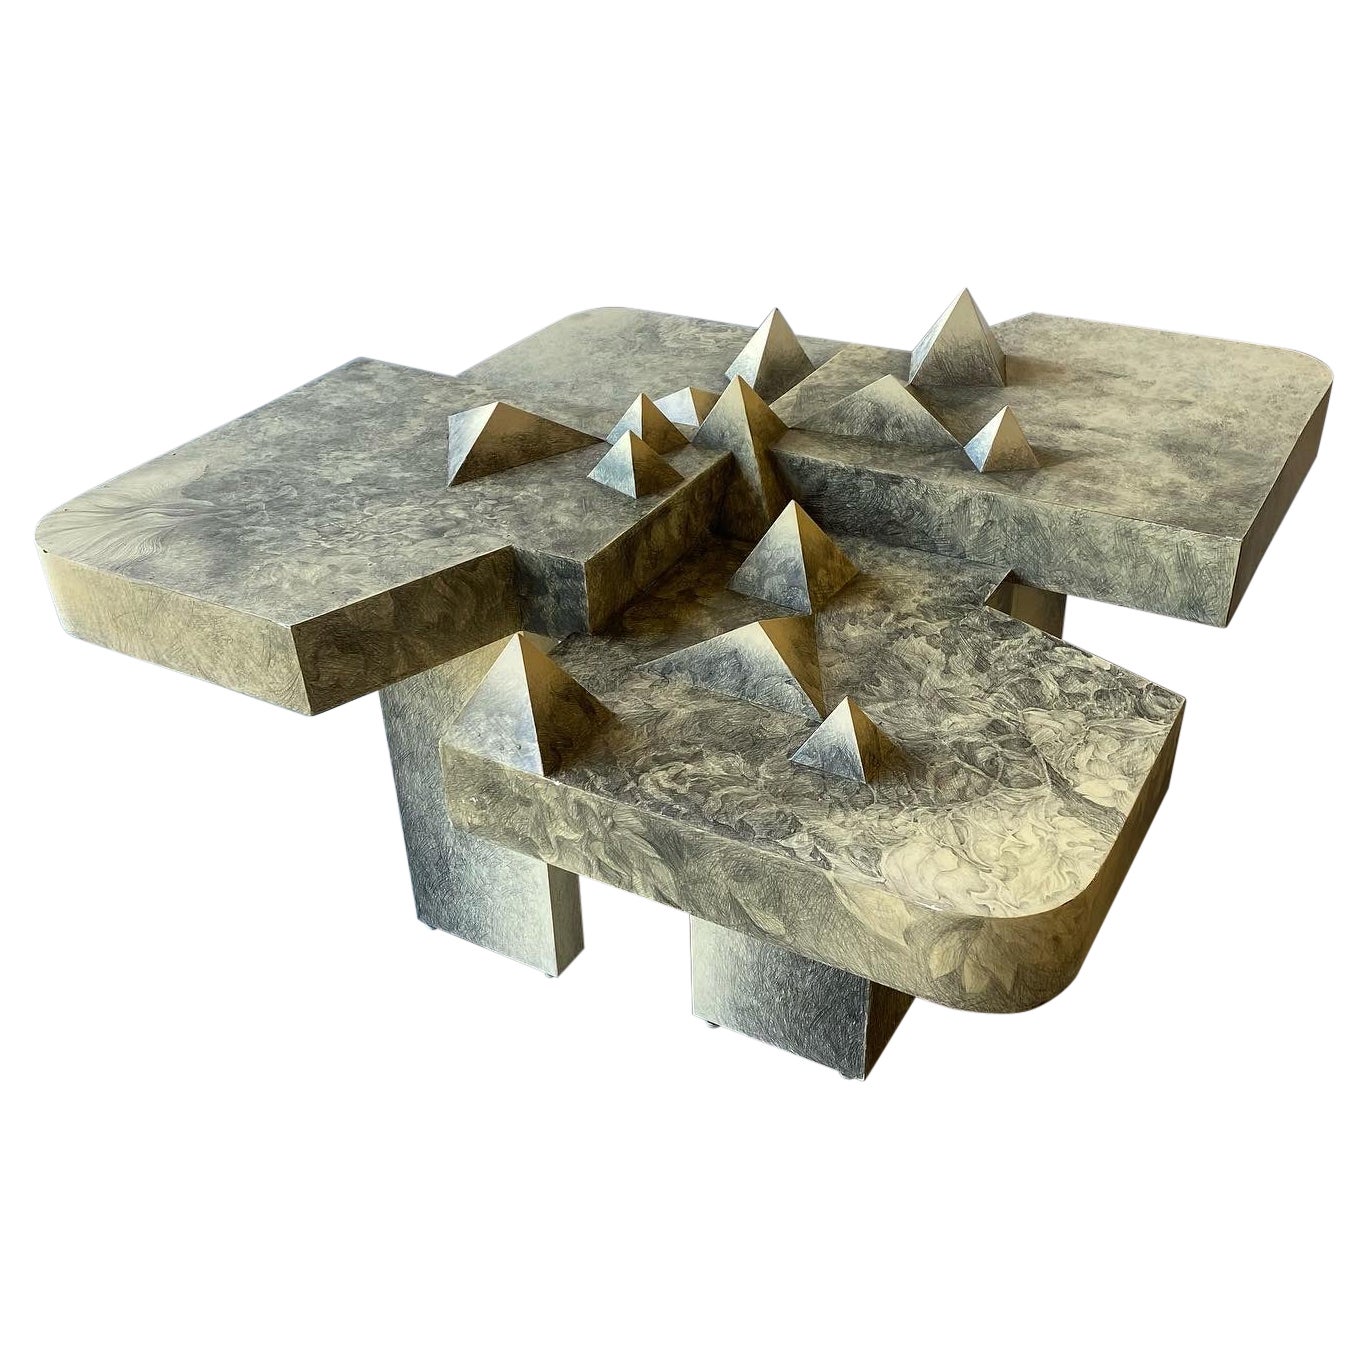 Sculptural Coffee Table, Edward Rokosz, 1992 For Sale